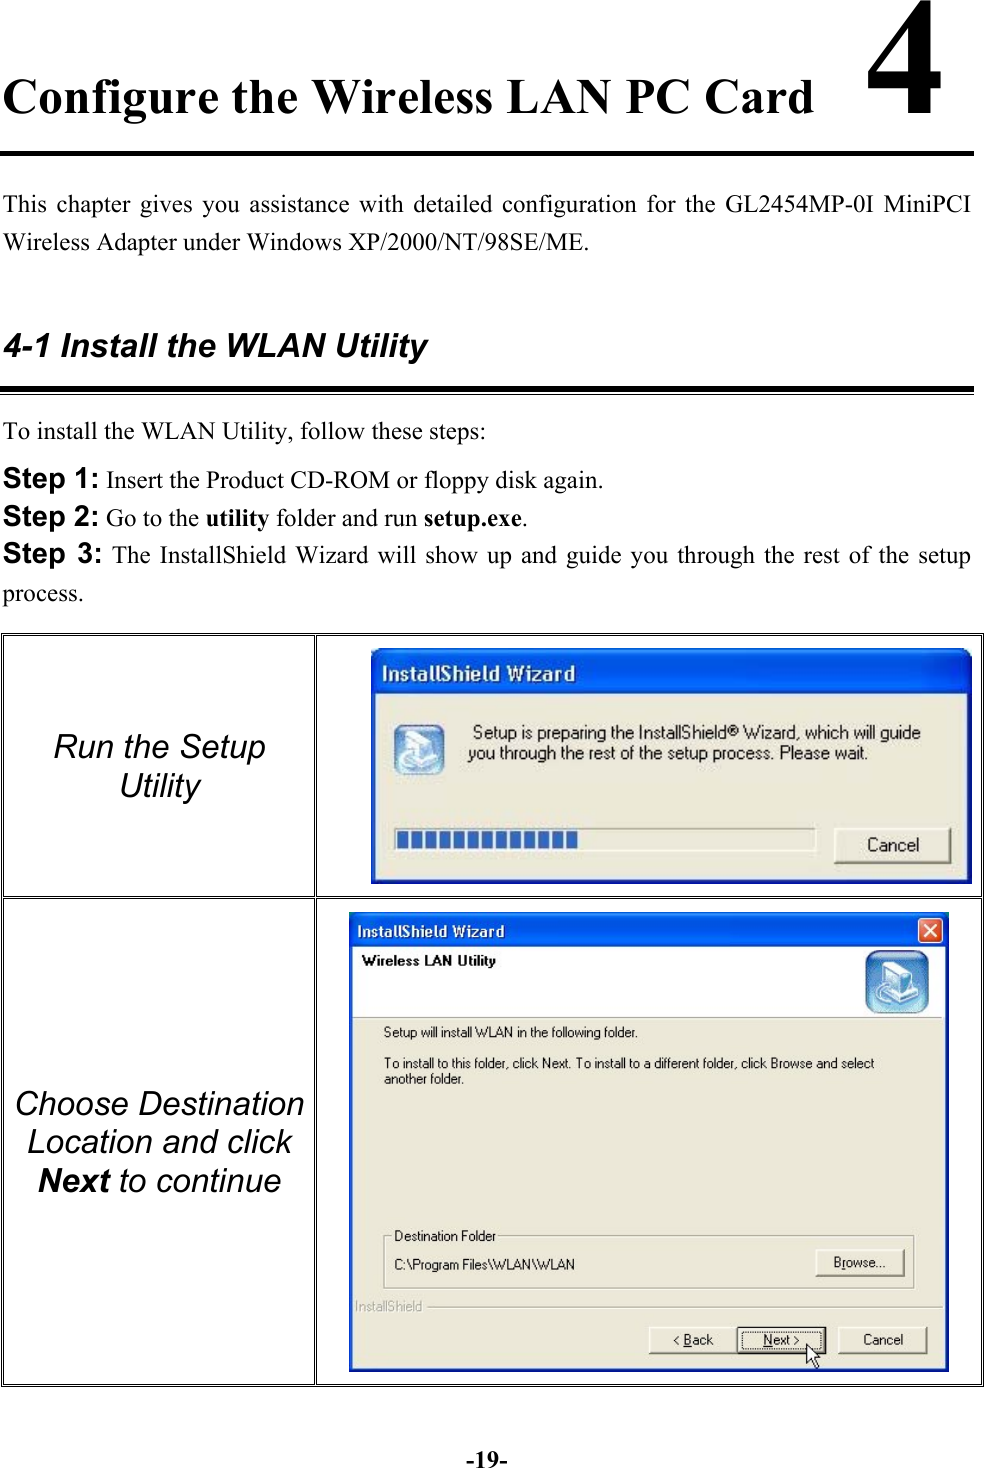 -19-Configure the Wireless LAN PC Card    4This chapter gives you assistance with detailed configuration for the GL2454MP-0I MiniPCIWireless Adapter under Windows XP/2000/NT/98SE/ME.4-1 Install the WLAN UtilityTo install the WLAN Utility, follow these steps:Step 1: Insert the Product CD-ROM or floppy disk again.Step 2: Go to the utility folder and run setup.exe.Step 3: The InstallShield Wizard will show up and guide you through the rest of the setupprocess.Run the SetupUtility Choose DestinationLocation and clickNext to continue